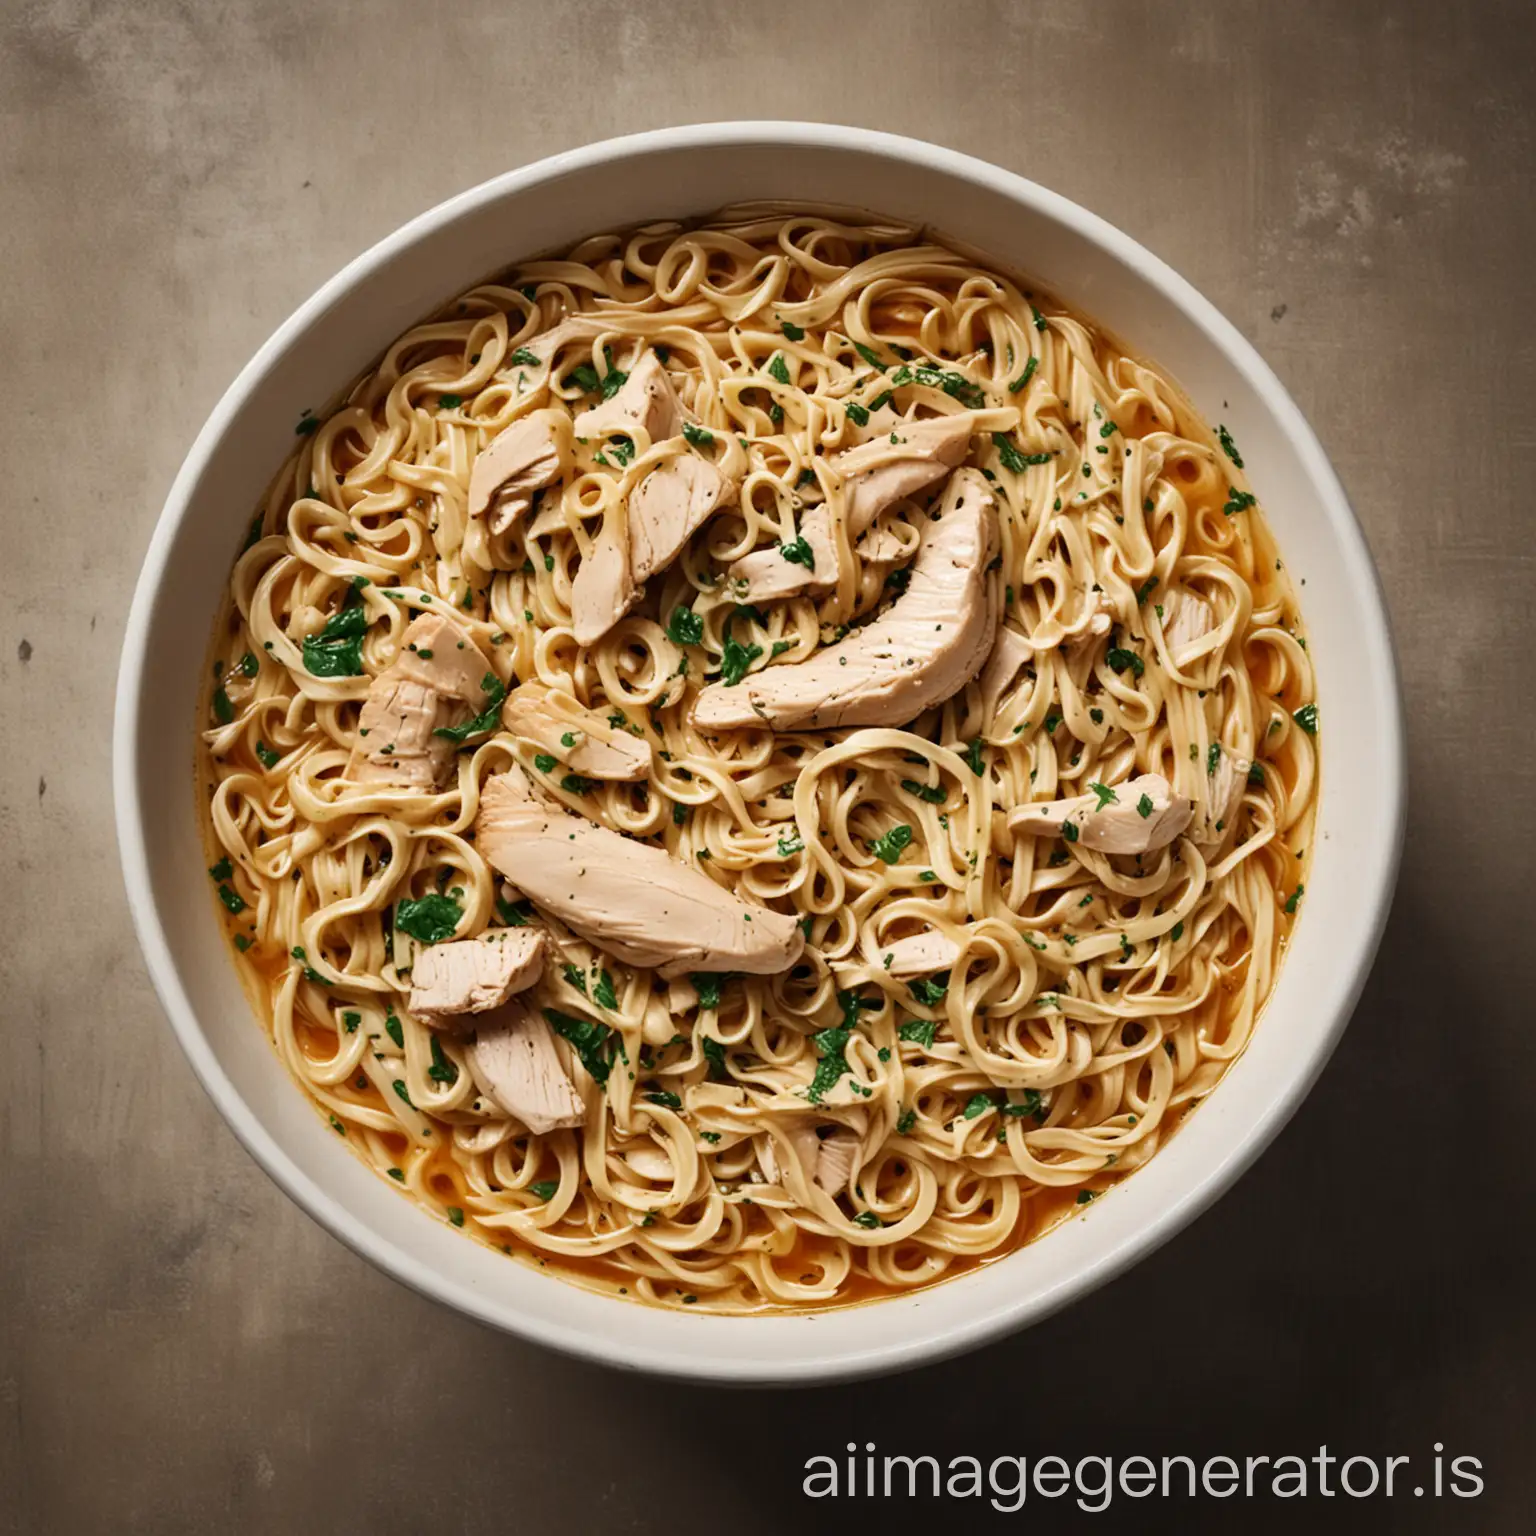 Relastic image of chicken noodle